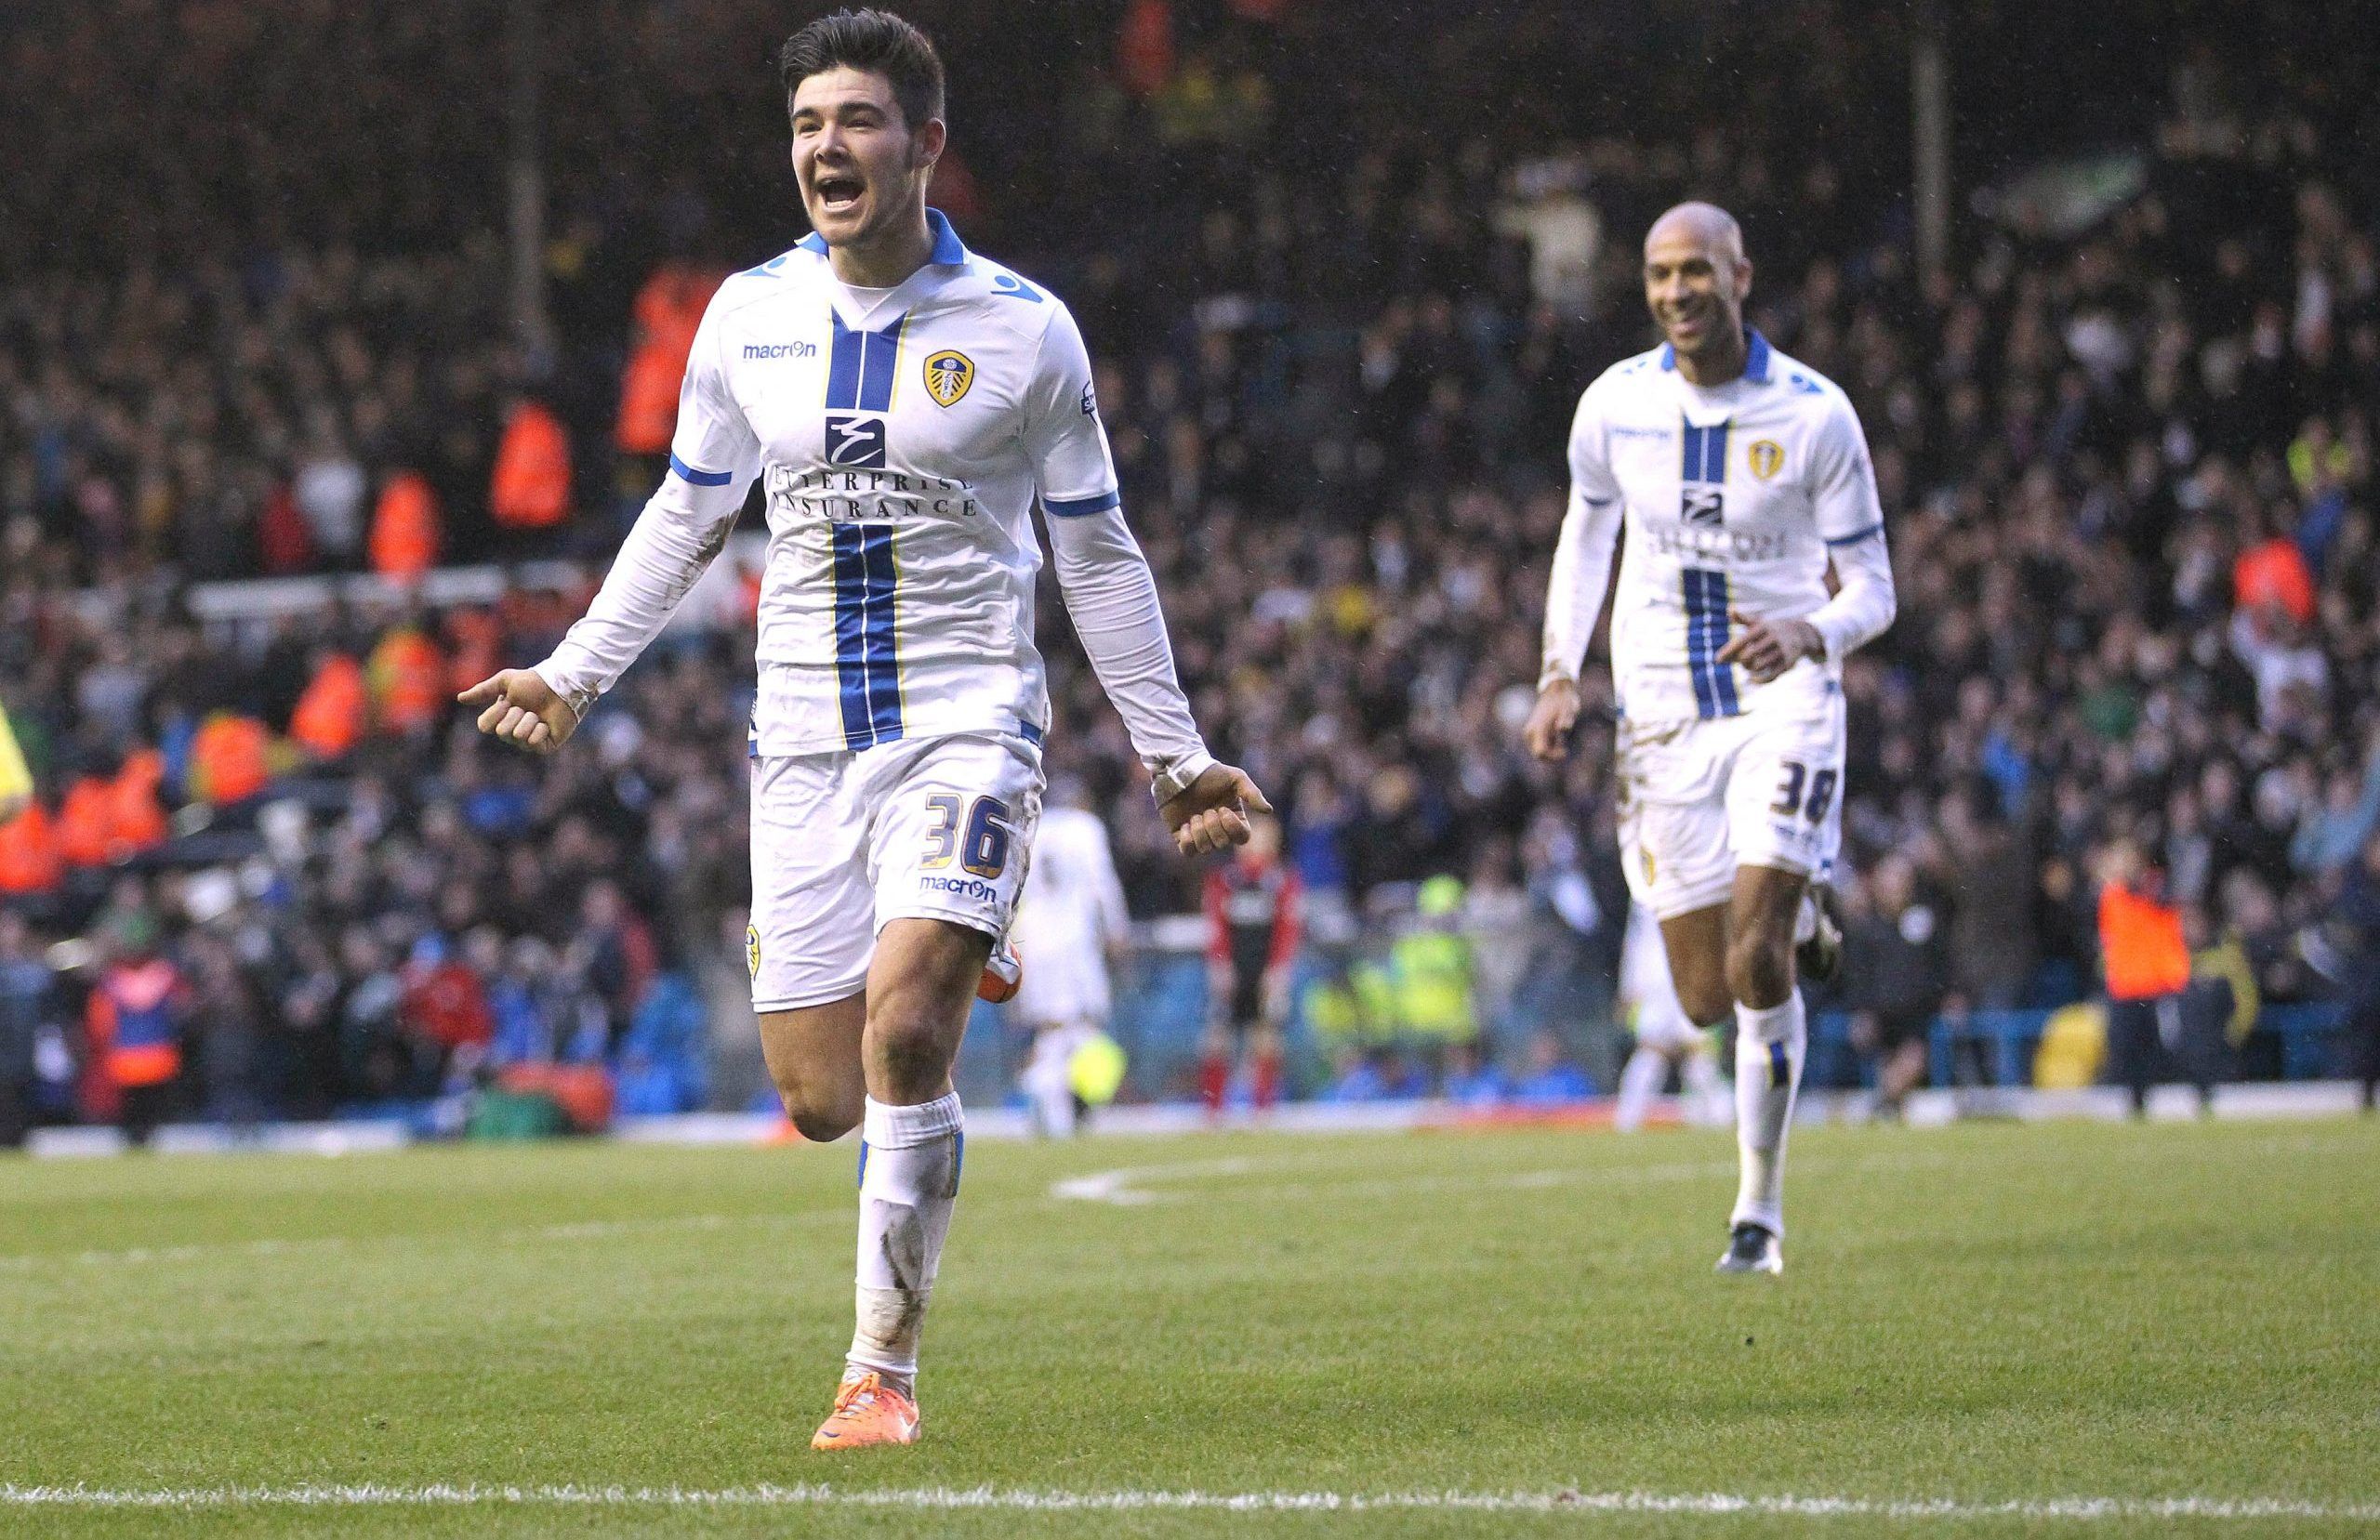 Football - Leeds United v Huddersfield Town - Sky Bet Football League Championship - Elland Road - 1/2/14 
Alex Mowatt of Leeds United Celebrates scoring his teams fifth goal  
Mandatory Credit: Action Images / John Clifton 
Livepic 
EDITORIAL USE ONLY. No use with unauthorized audio, video, data, fixture lists, club/league logos or live services. Online in-match use limited to 45 images, no video emulation. No use in betting, games or single club/league/player publications.  Please contact your